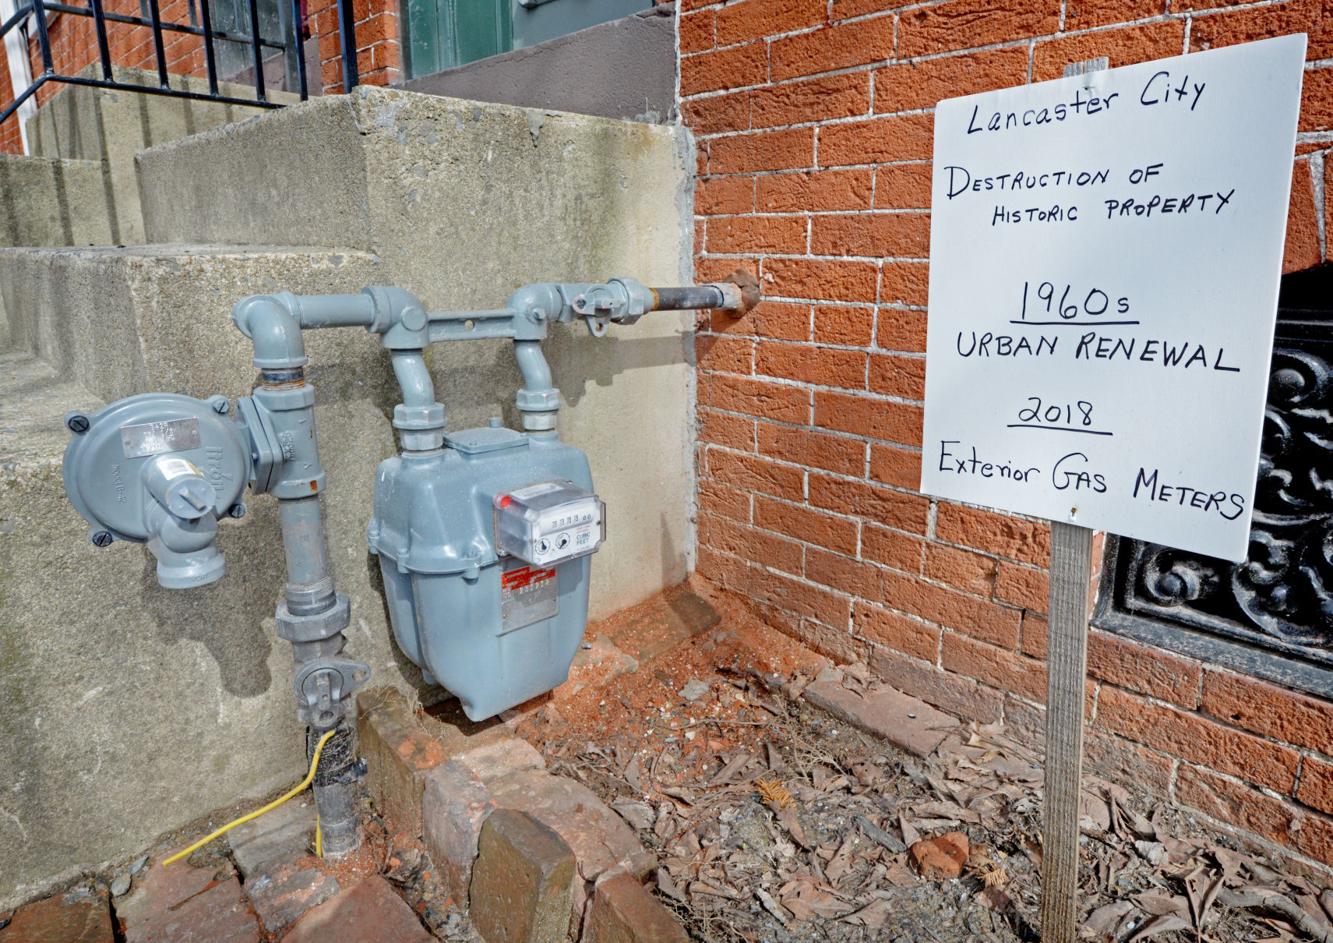 ugi-s-gas-meter-placements-remain-contentious-in-historic-lancaster